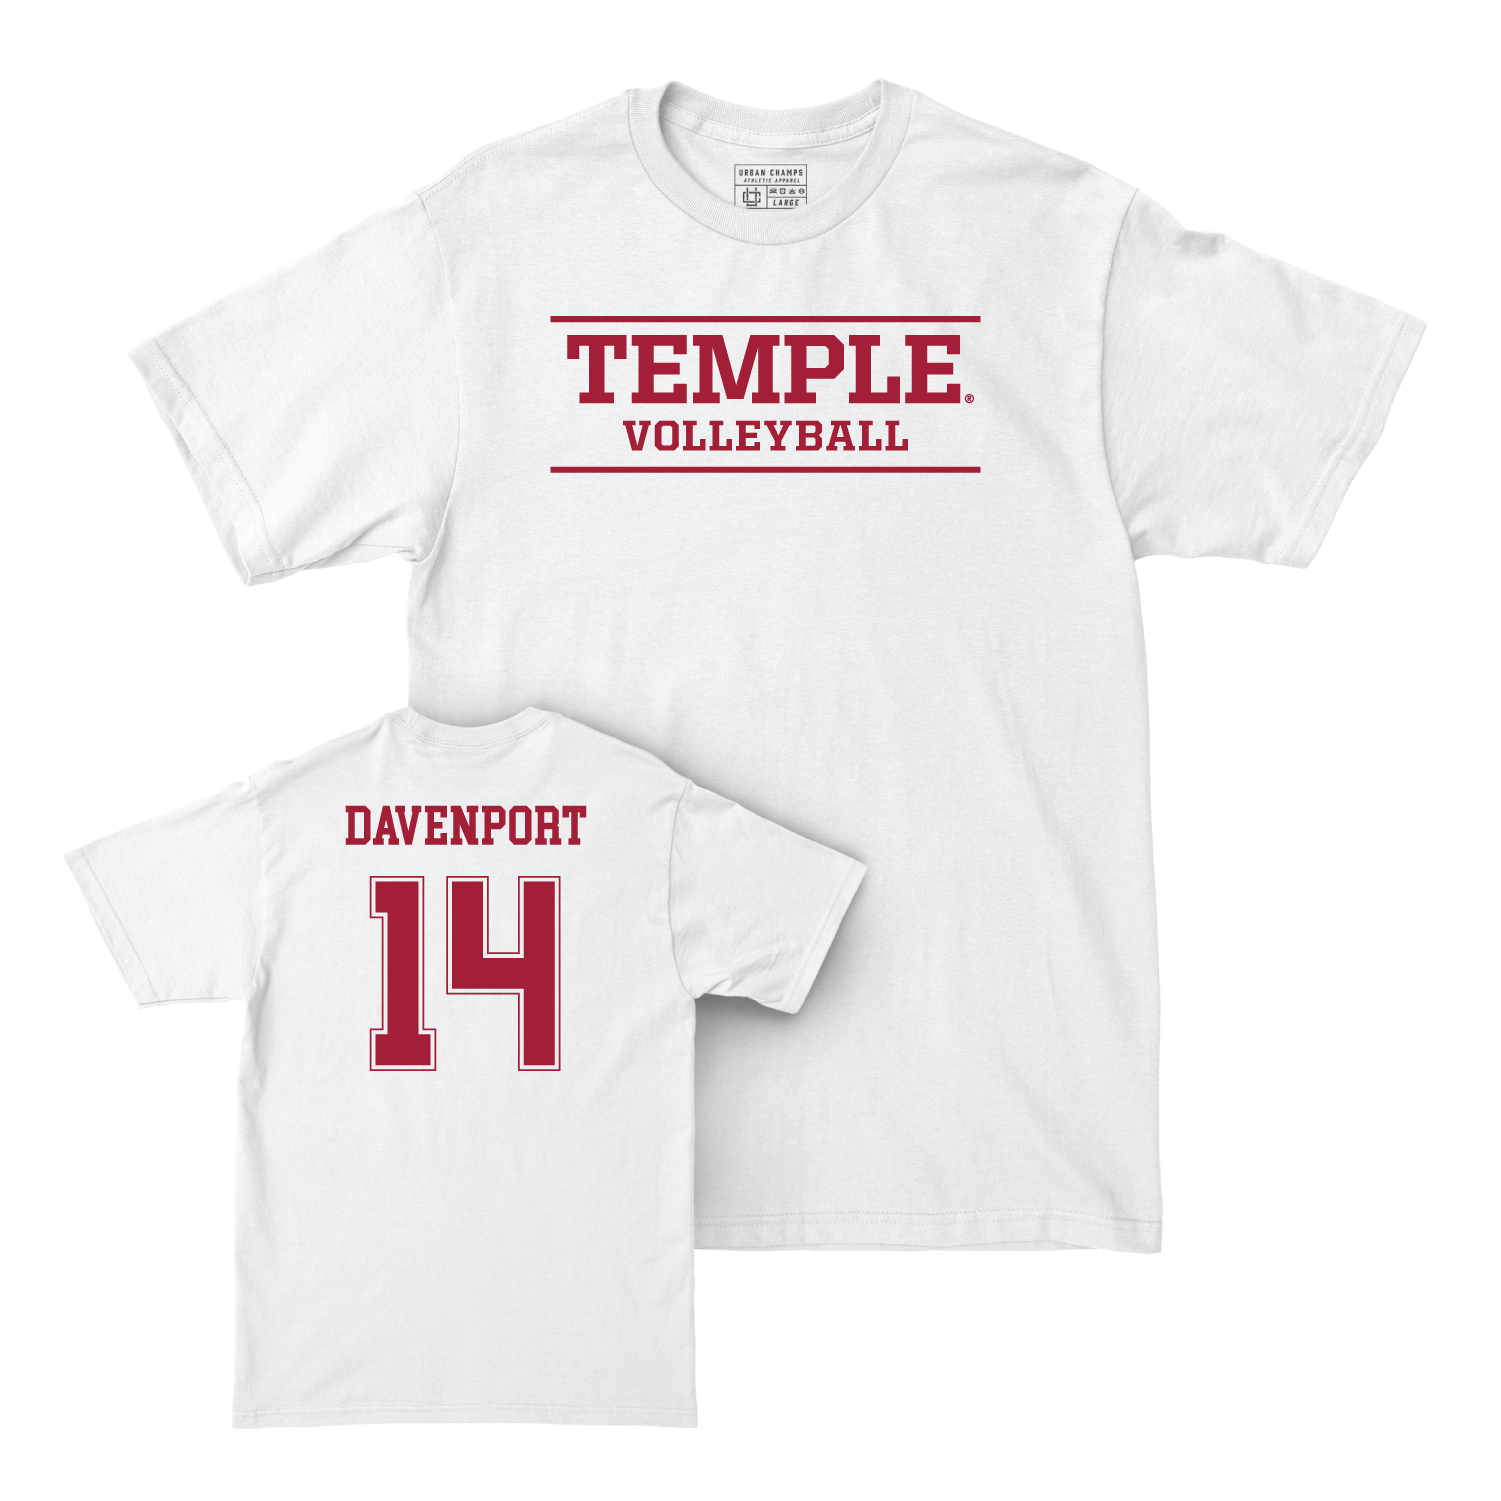 Women's Volleyball White Classic Comfort Colors Tee - Taylor Davenport Youth Small